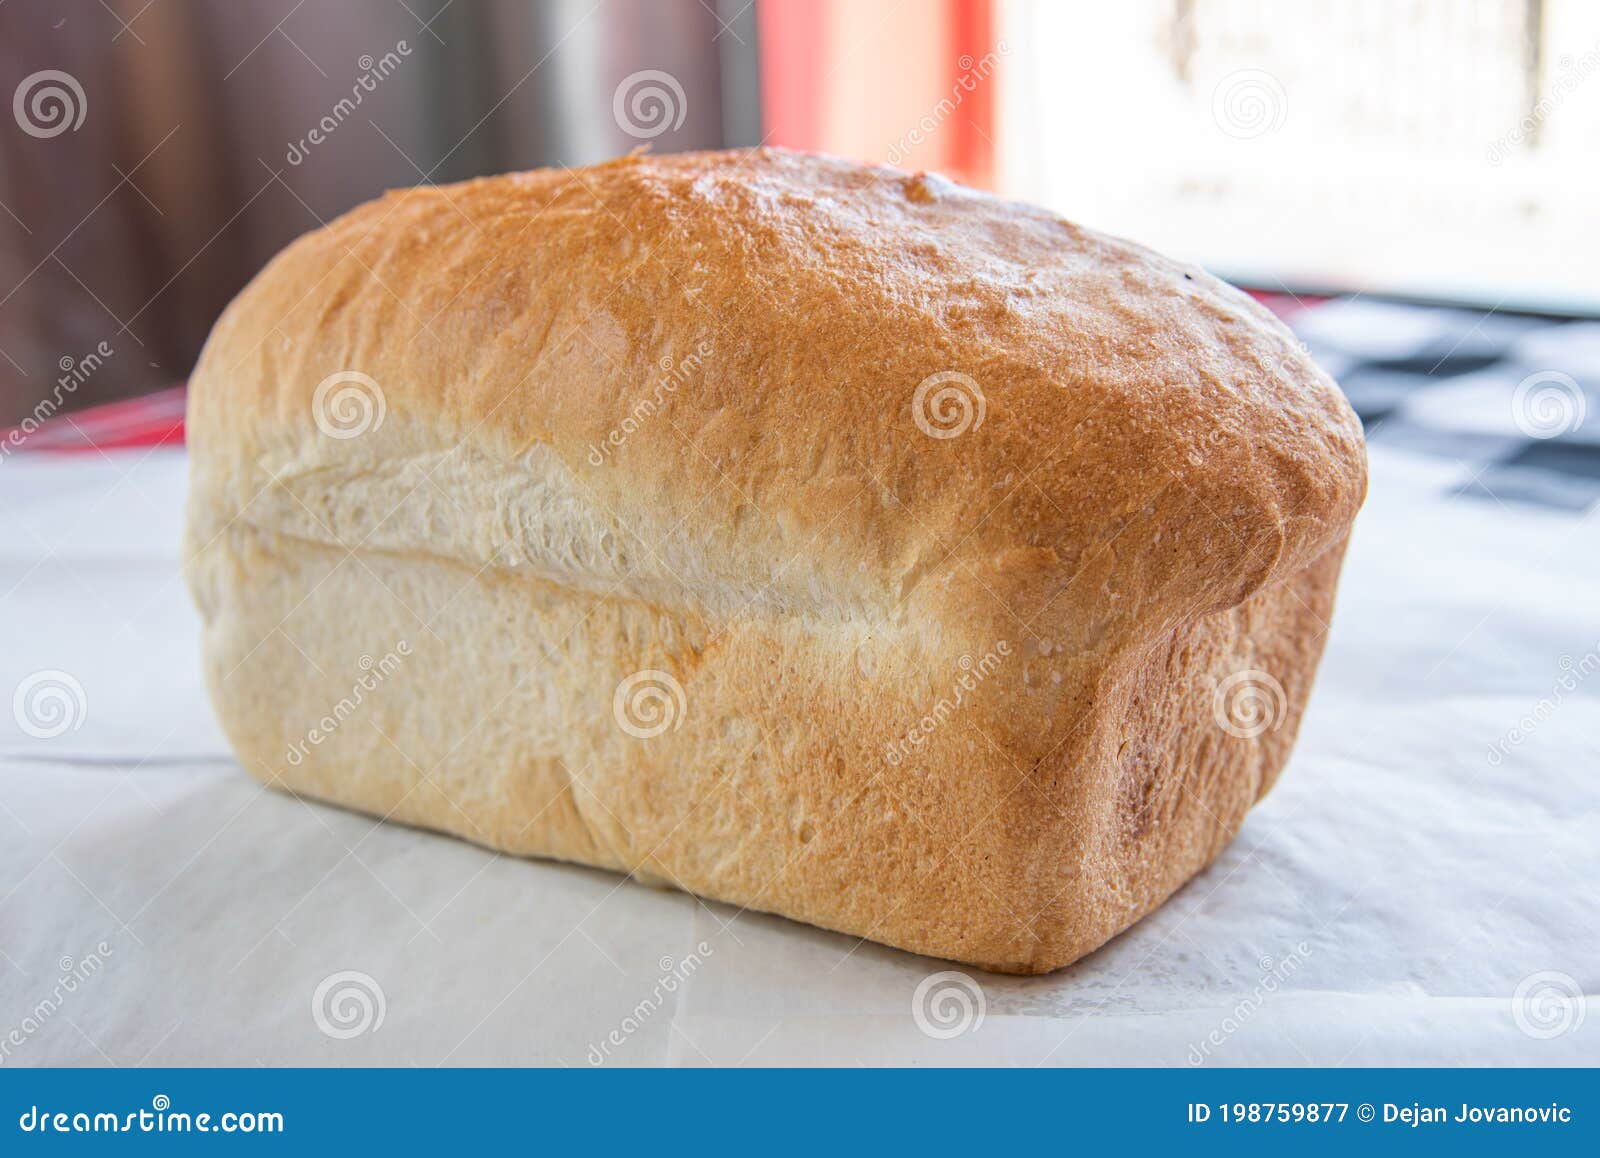 fresh home made bread loaf side view